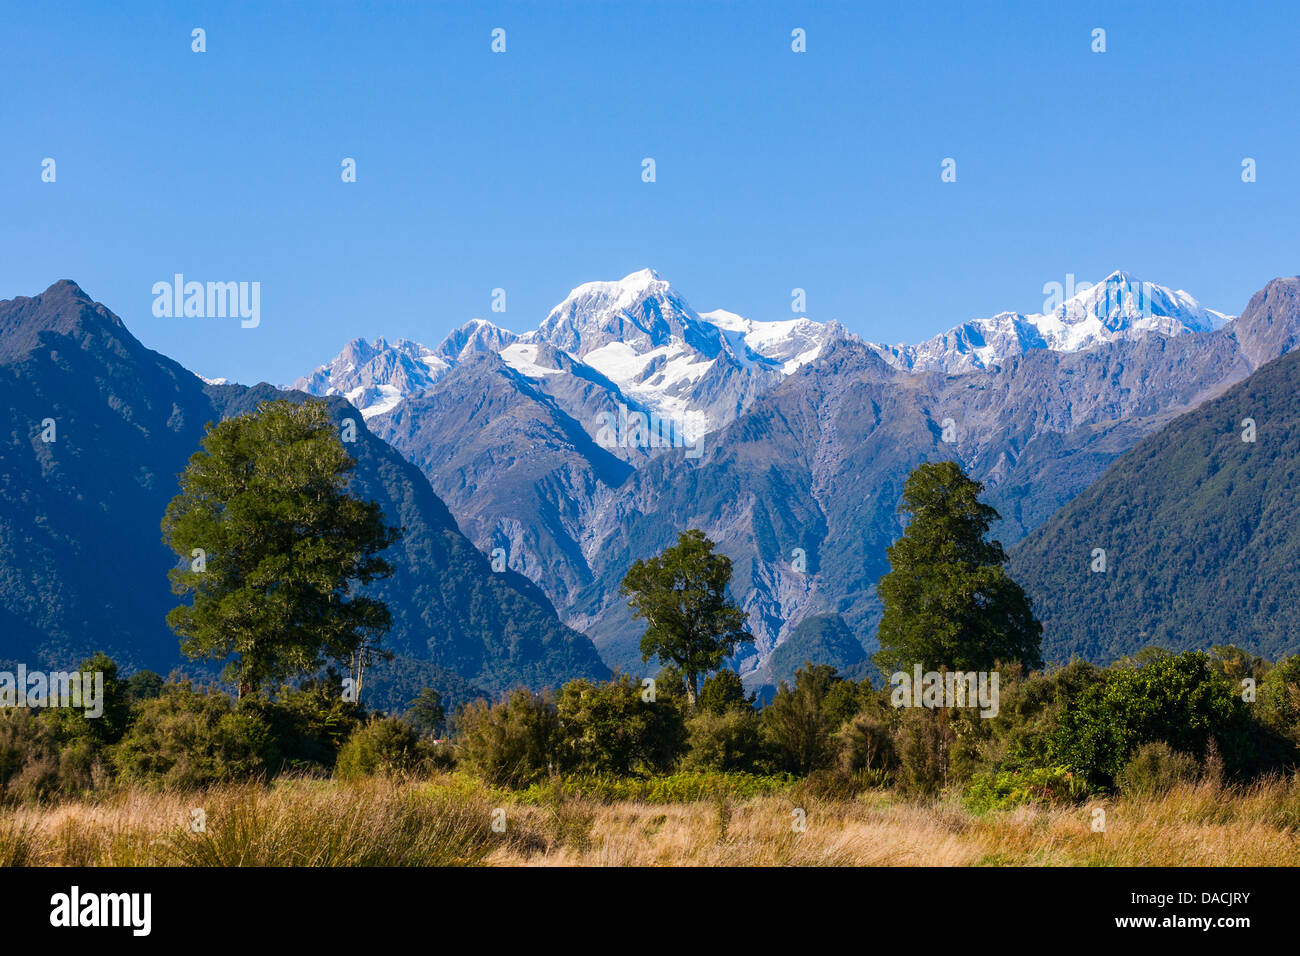 Aoraki/Mount Cook (3754m) is the highest mountain in New Zealand and is seen here from near Fox Glacier with Mount Tasman... Stock Photo